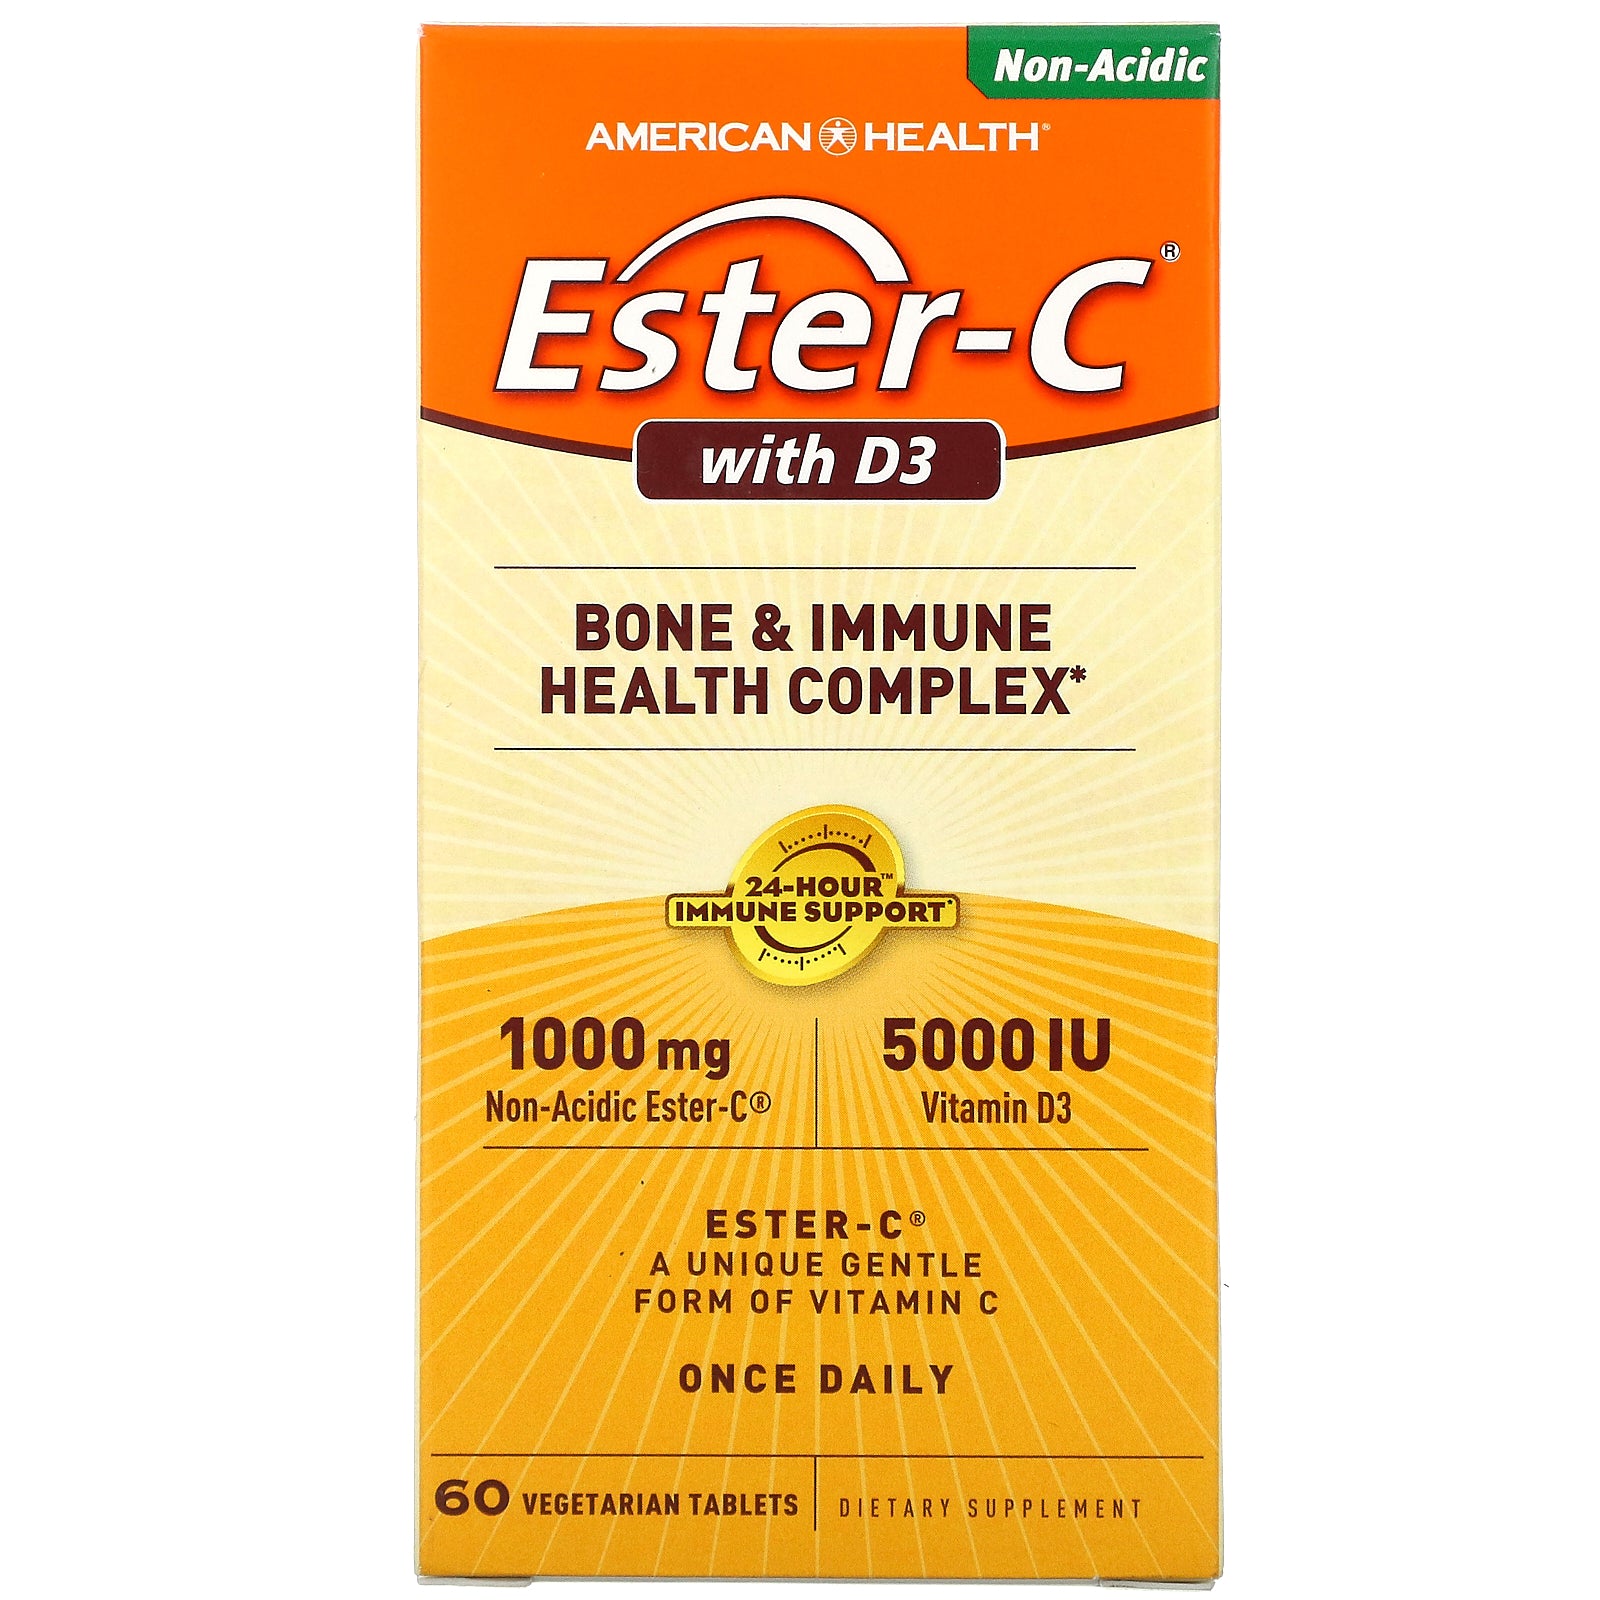 American Health, Ester-C with D3, 60 Vegetarian Tablets